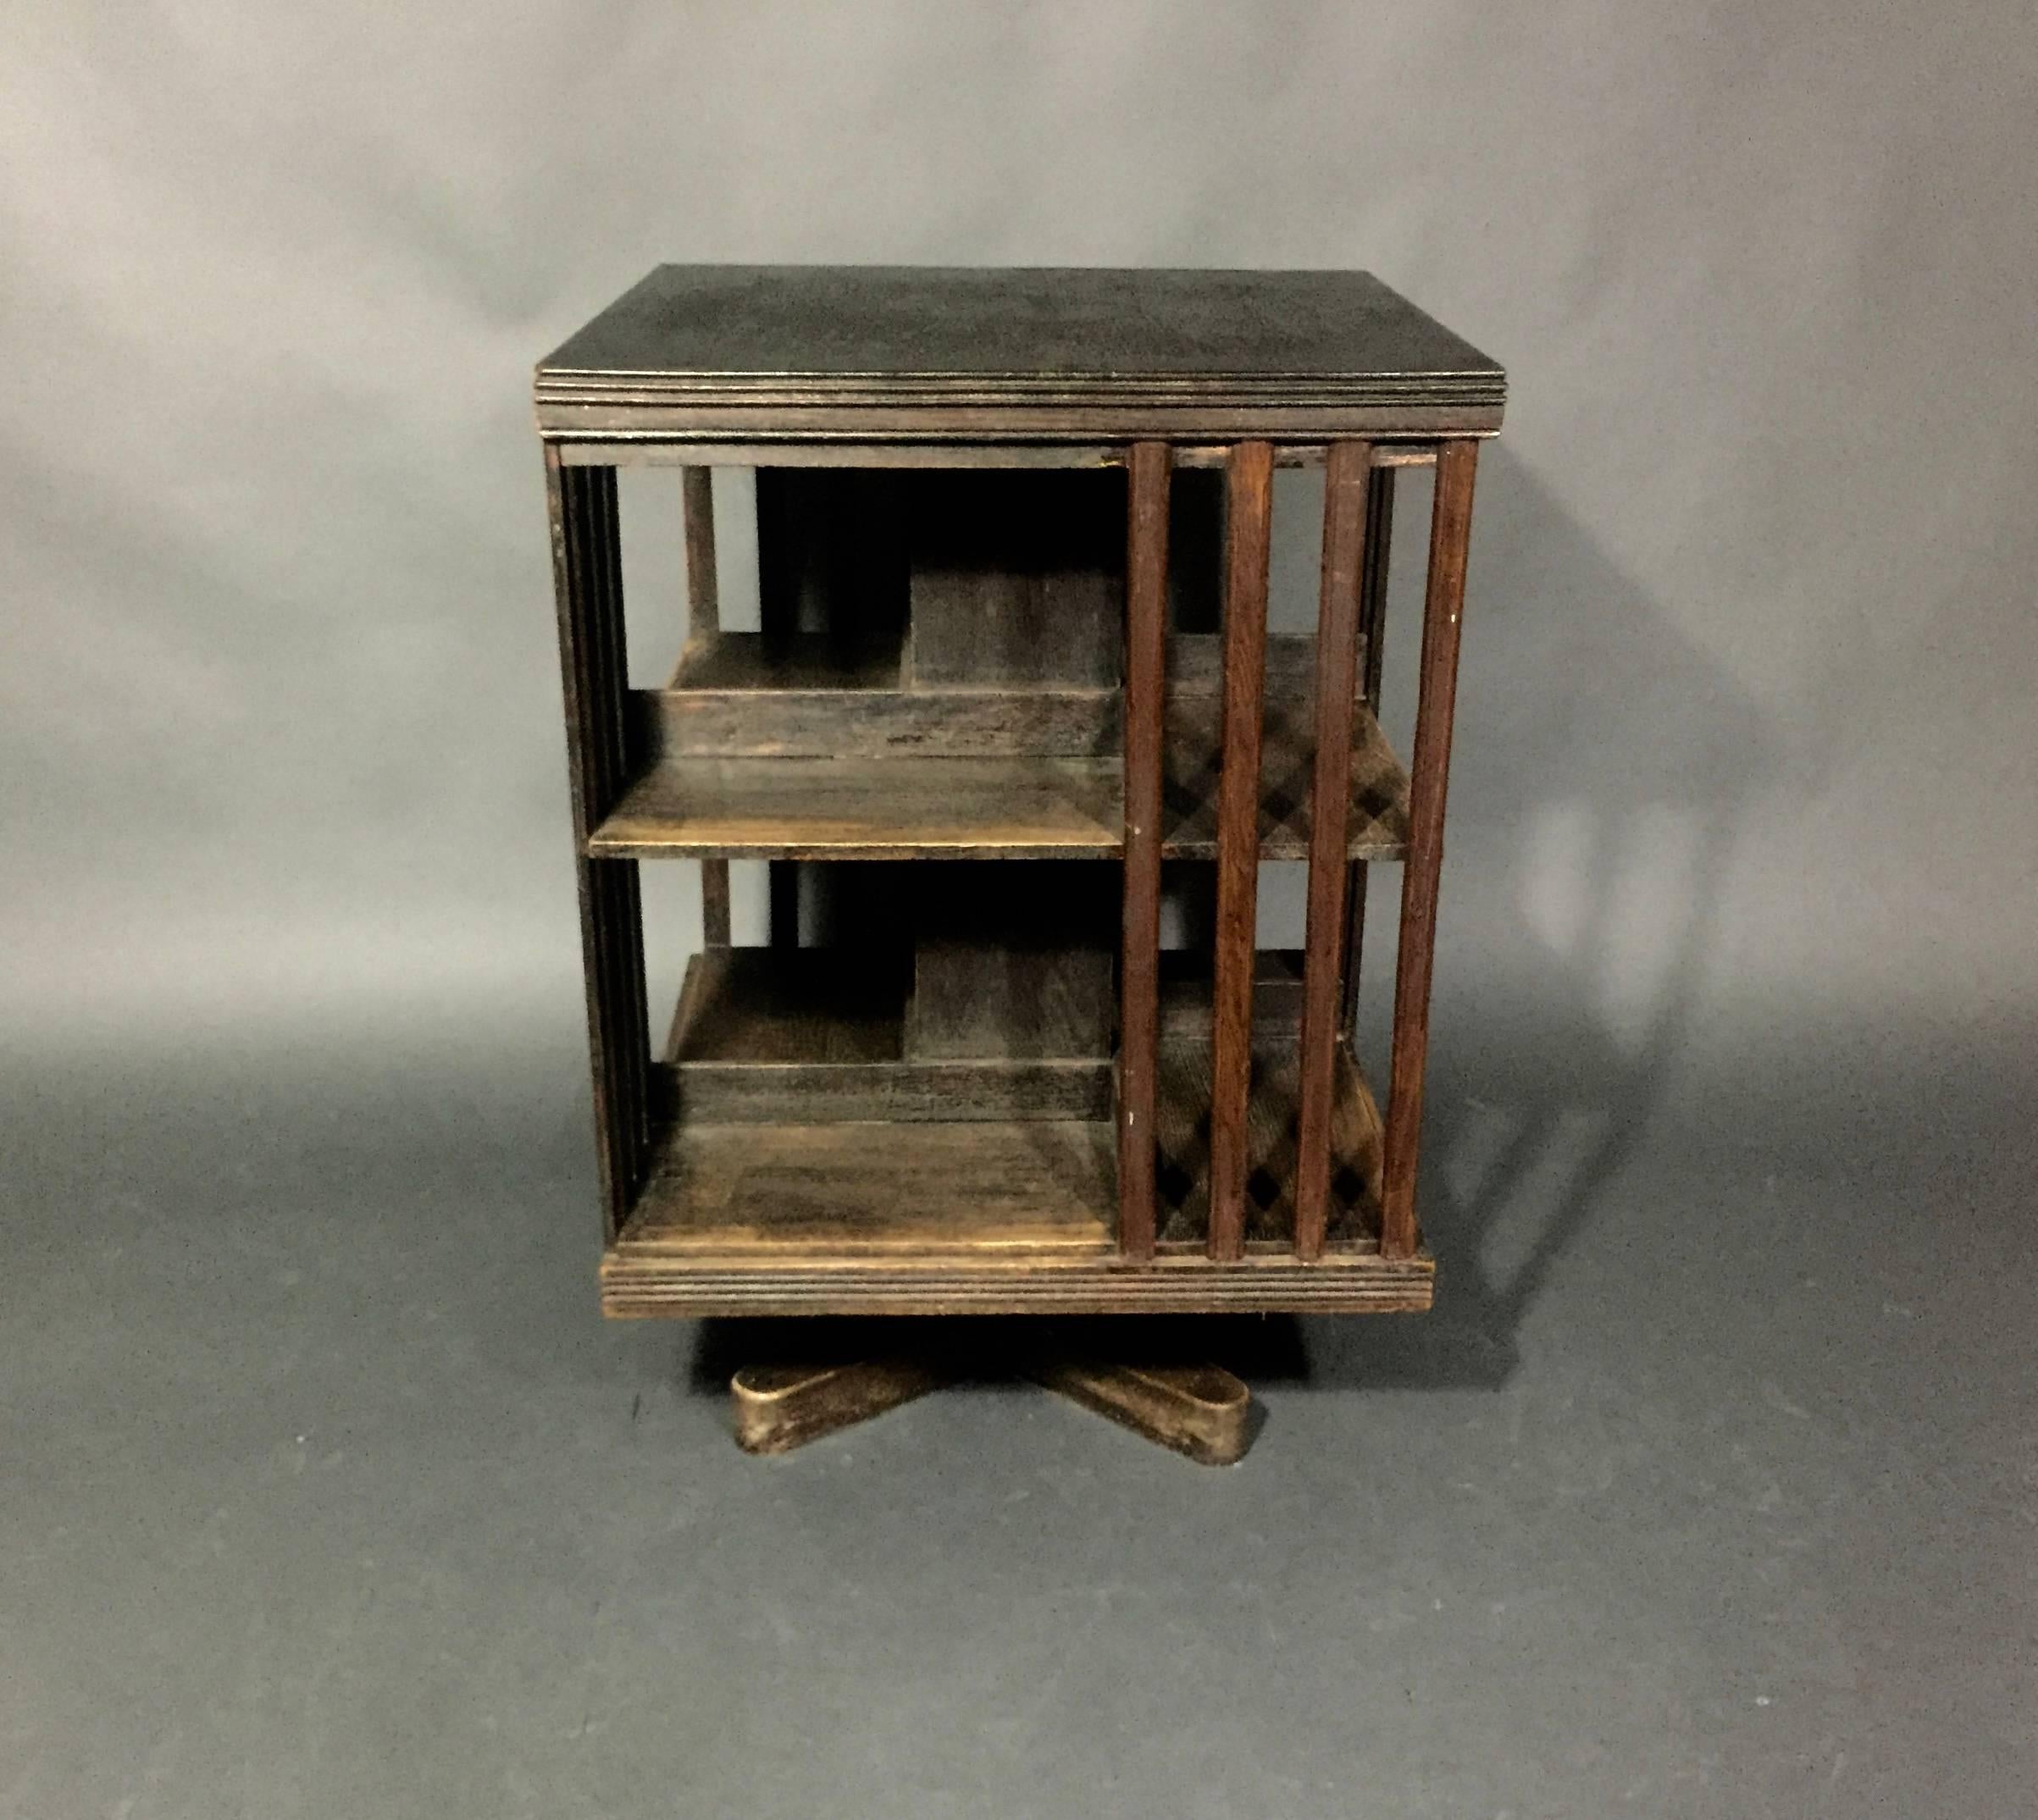 An unusual and perfectly vintage revolving bookcase in oakwood with four sides and two shelves. Vertical slats play homage to the Arts & Crafts movement. England, circa 1930. Wear and marks to finish overall.